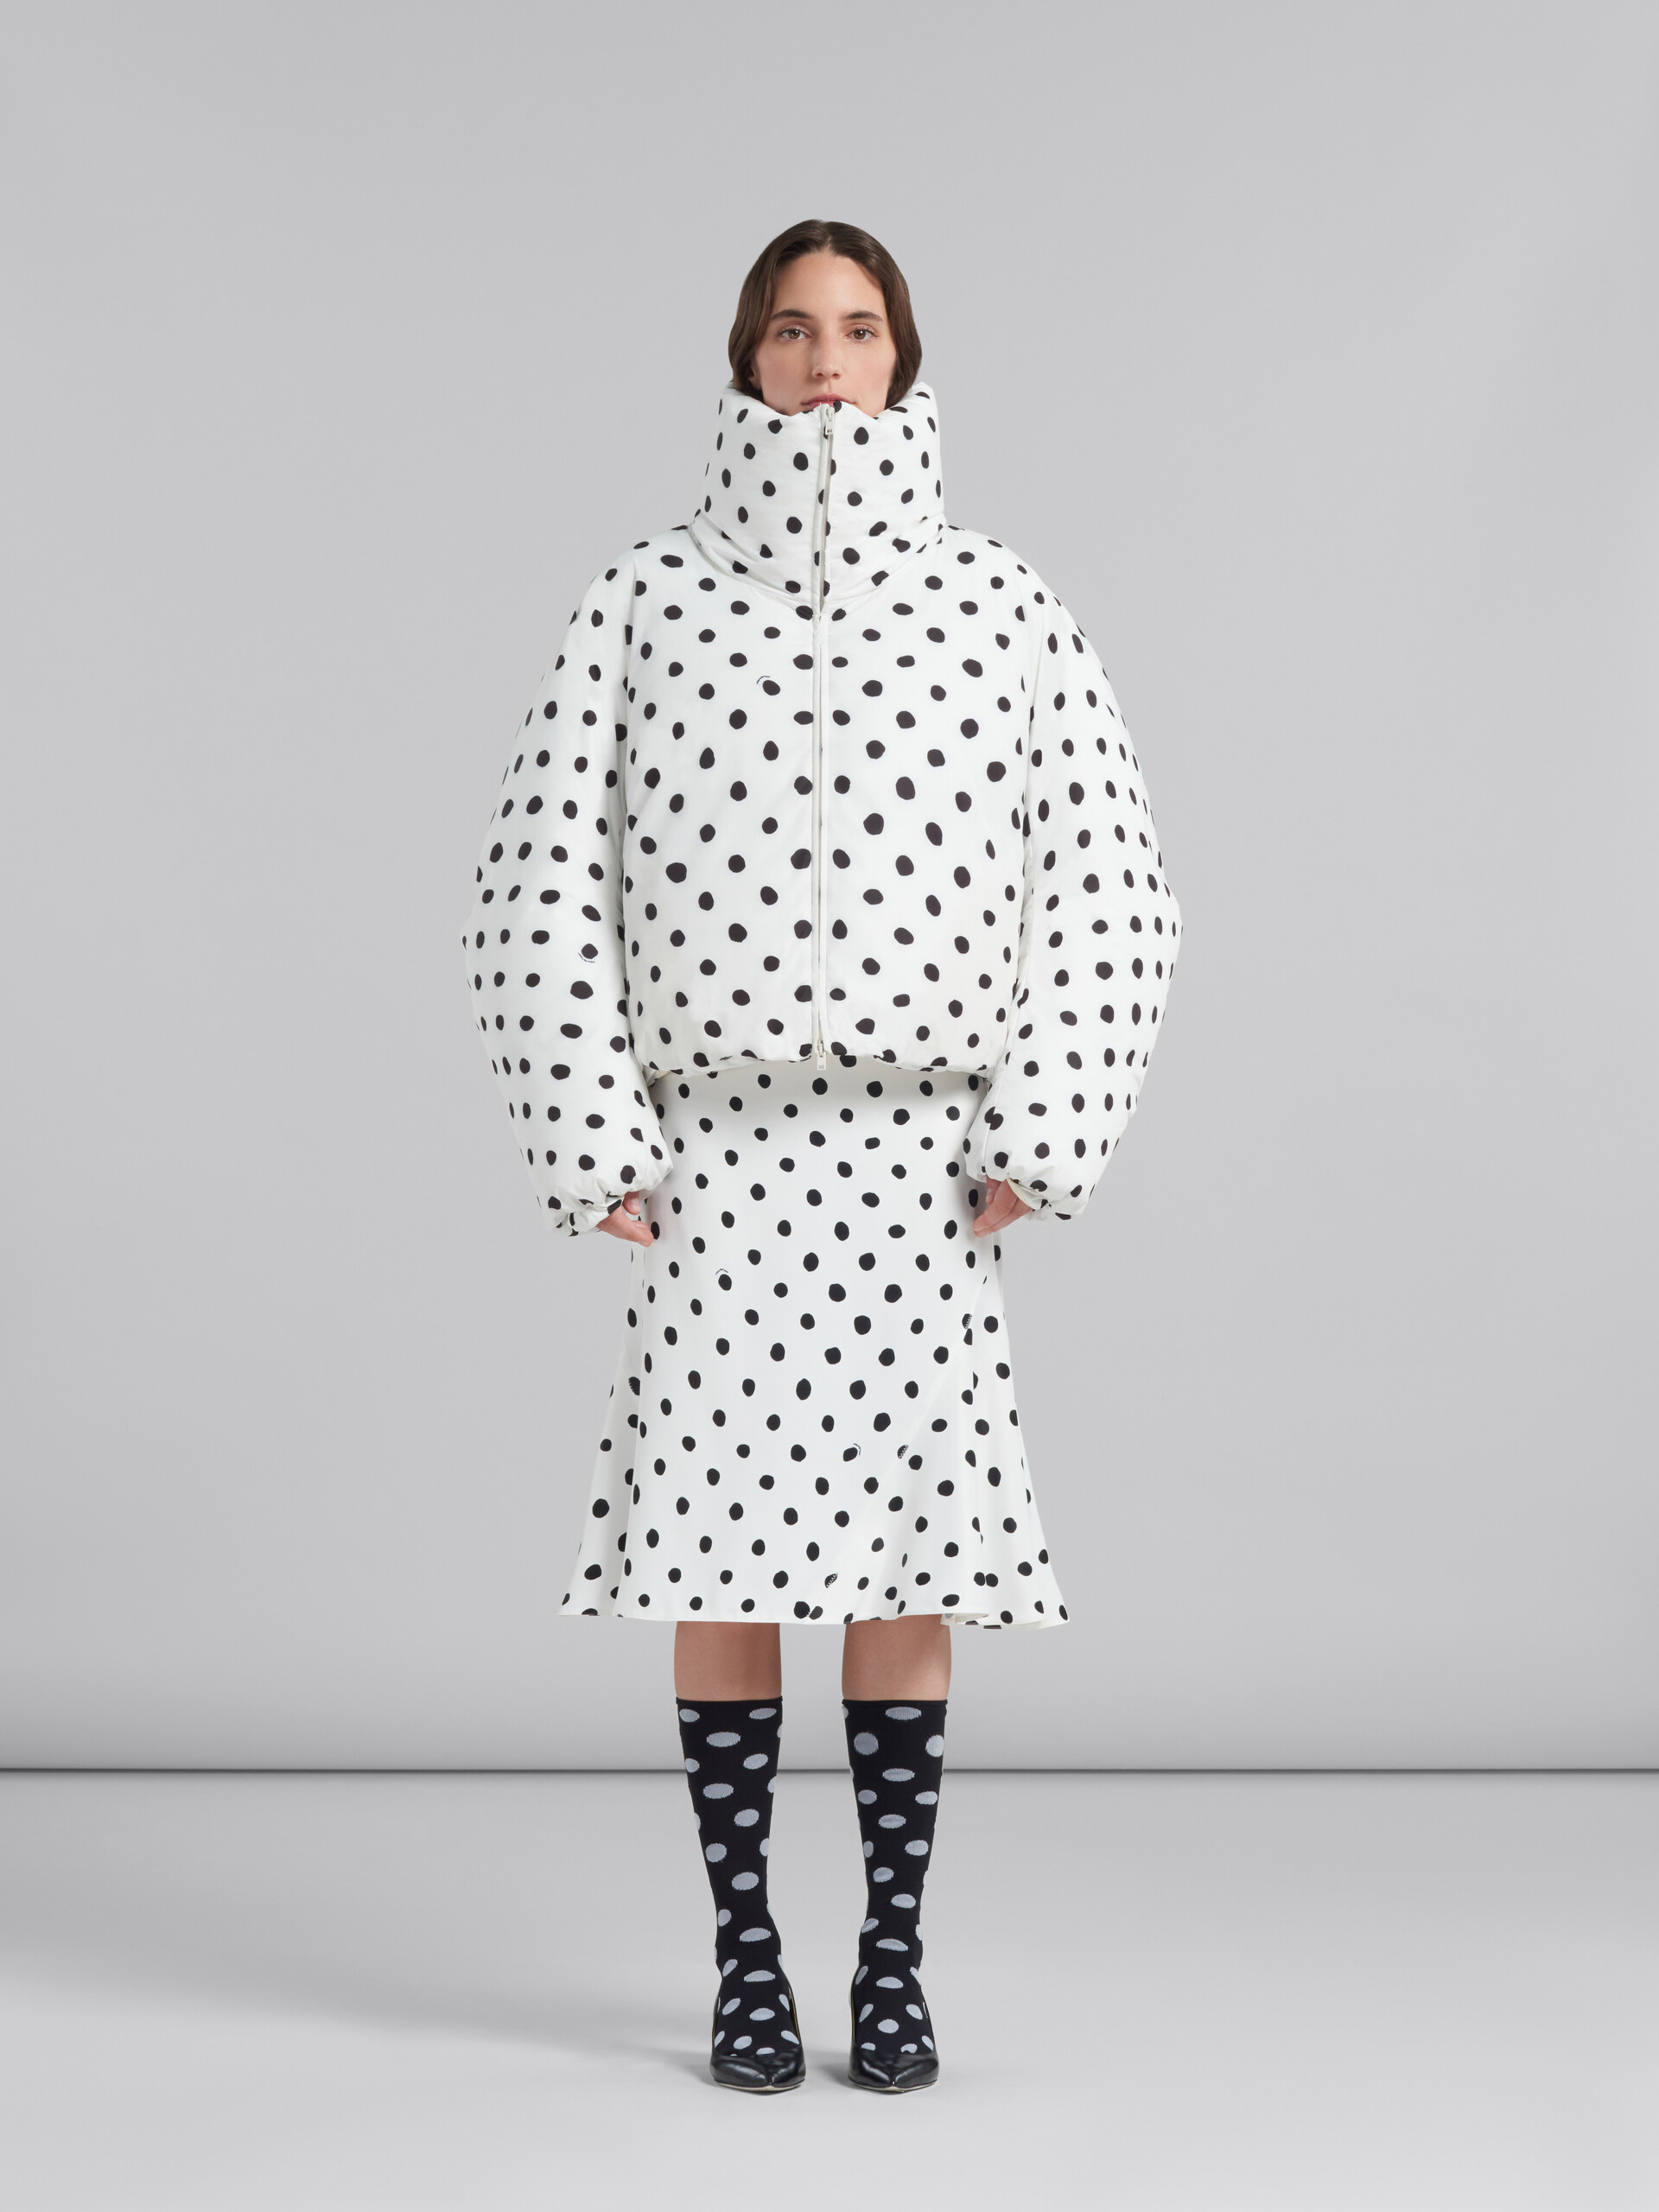 White oversized down jacket with polka dots - Winter jackets - Image 2